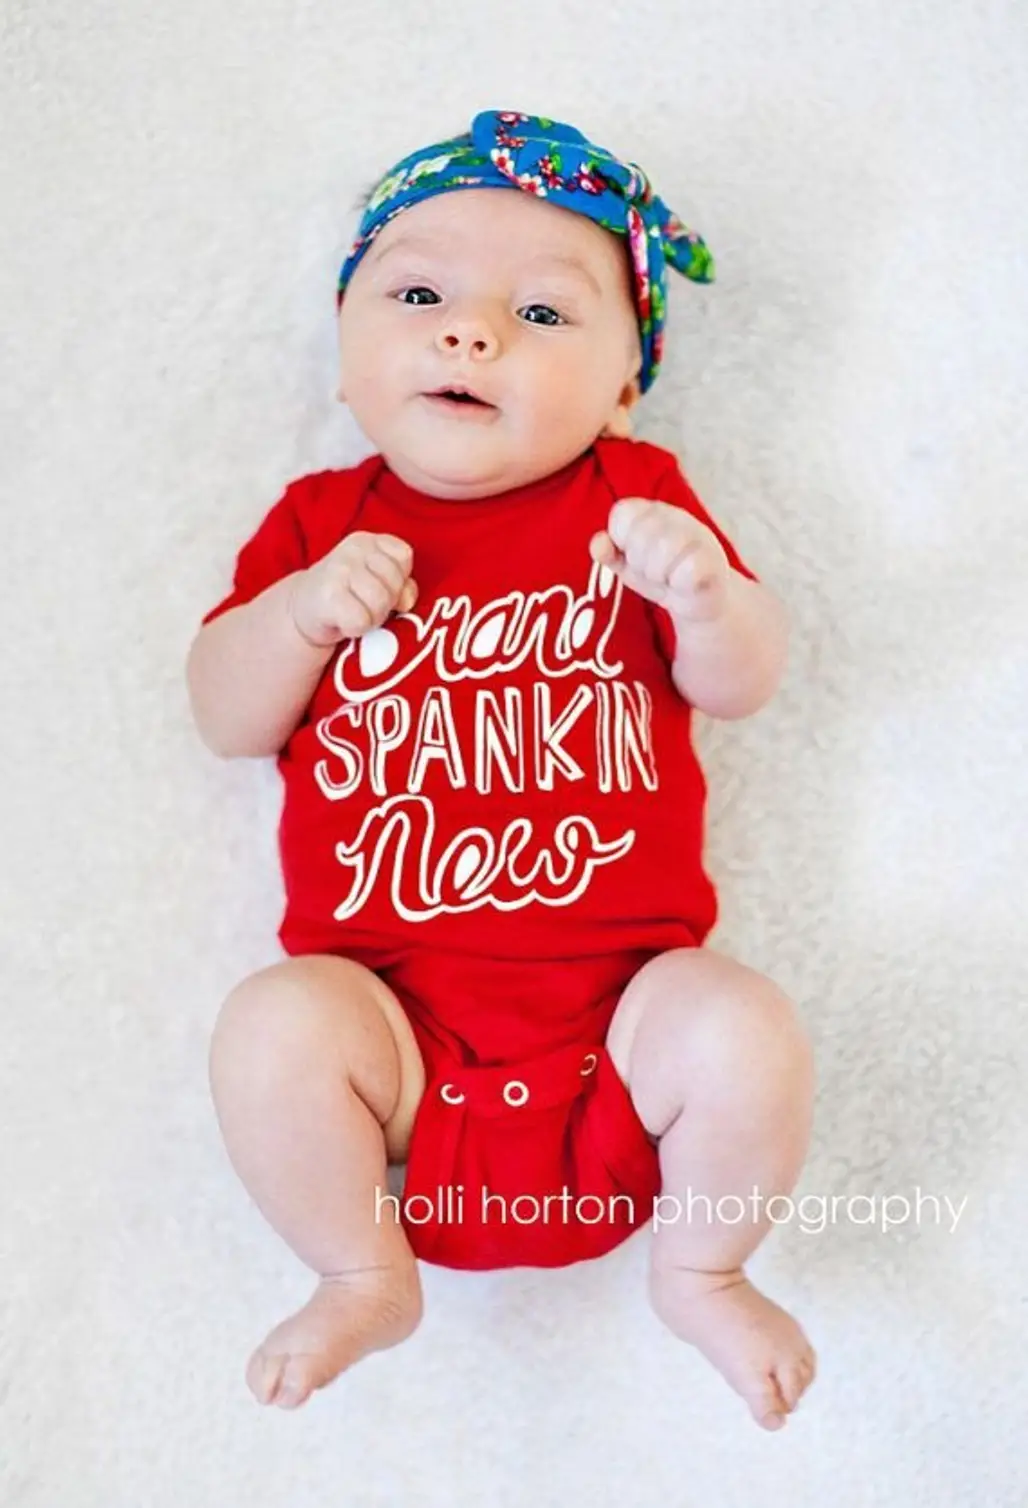 clothing,red,toddler,child,infant,